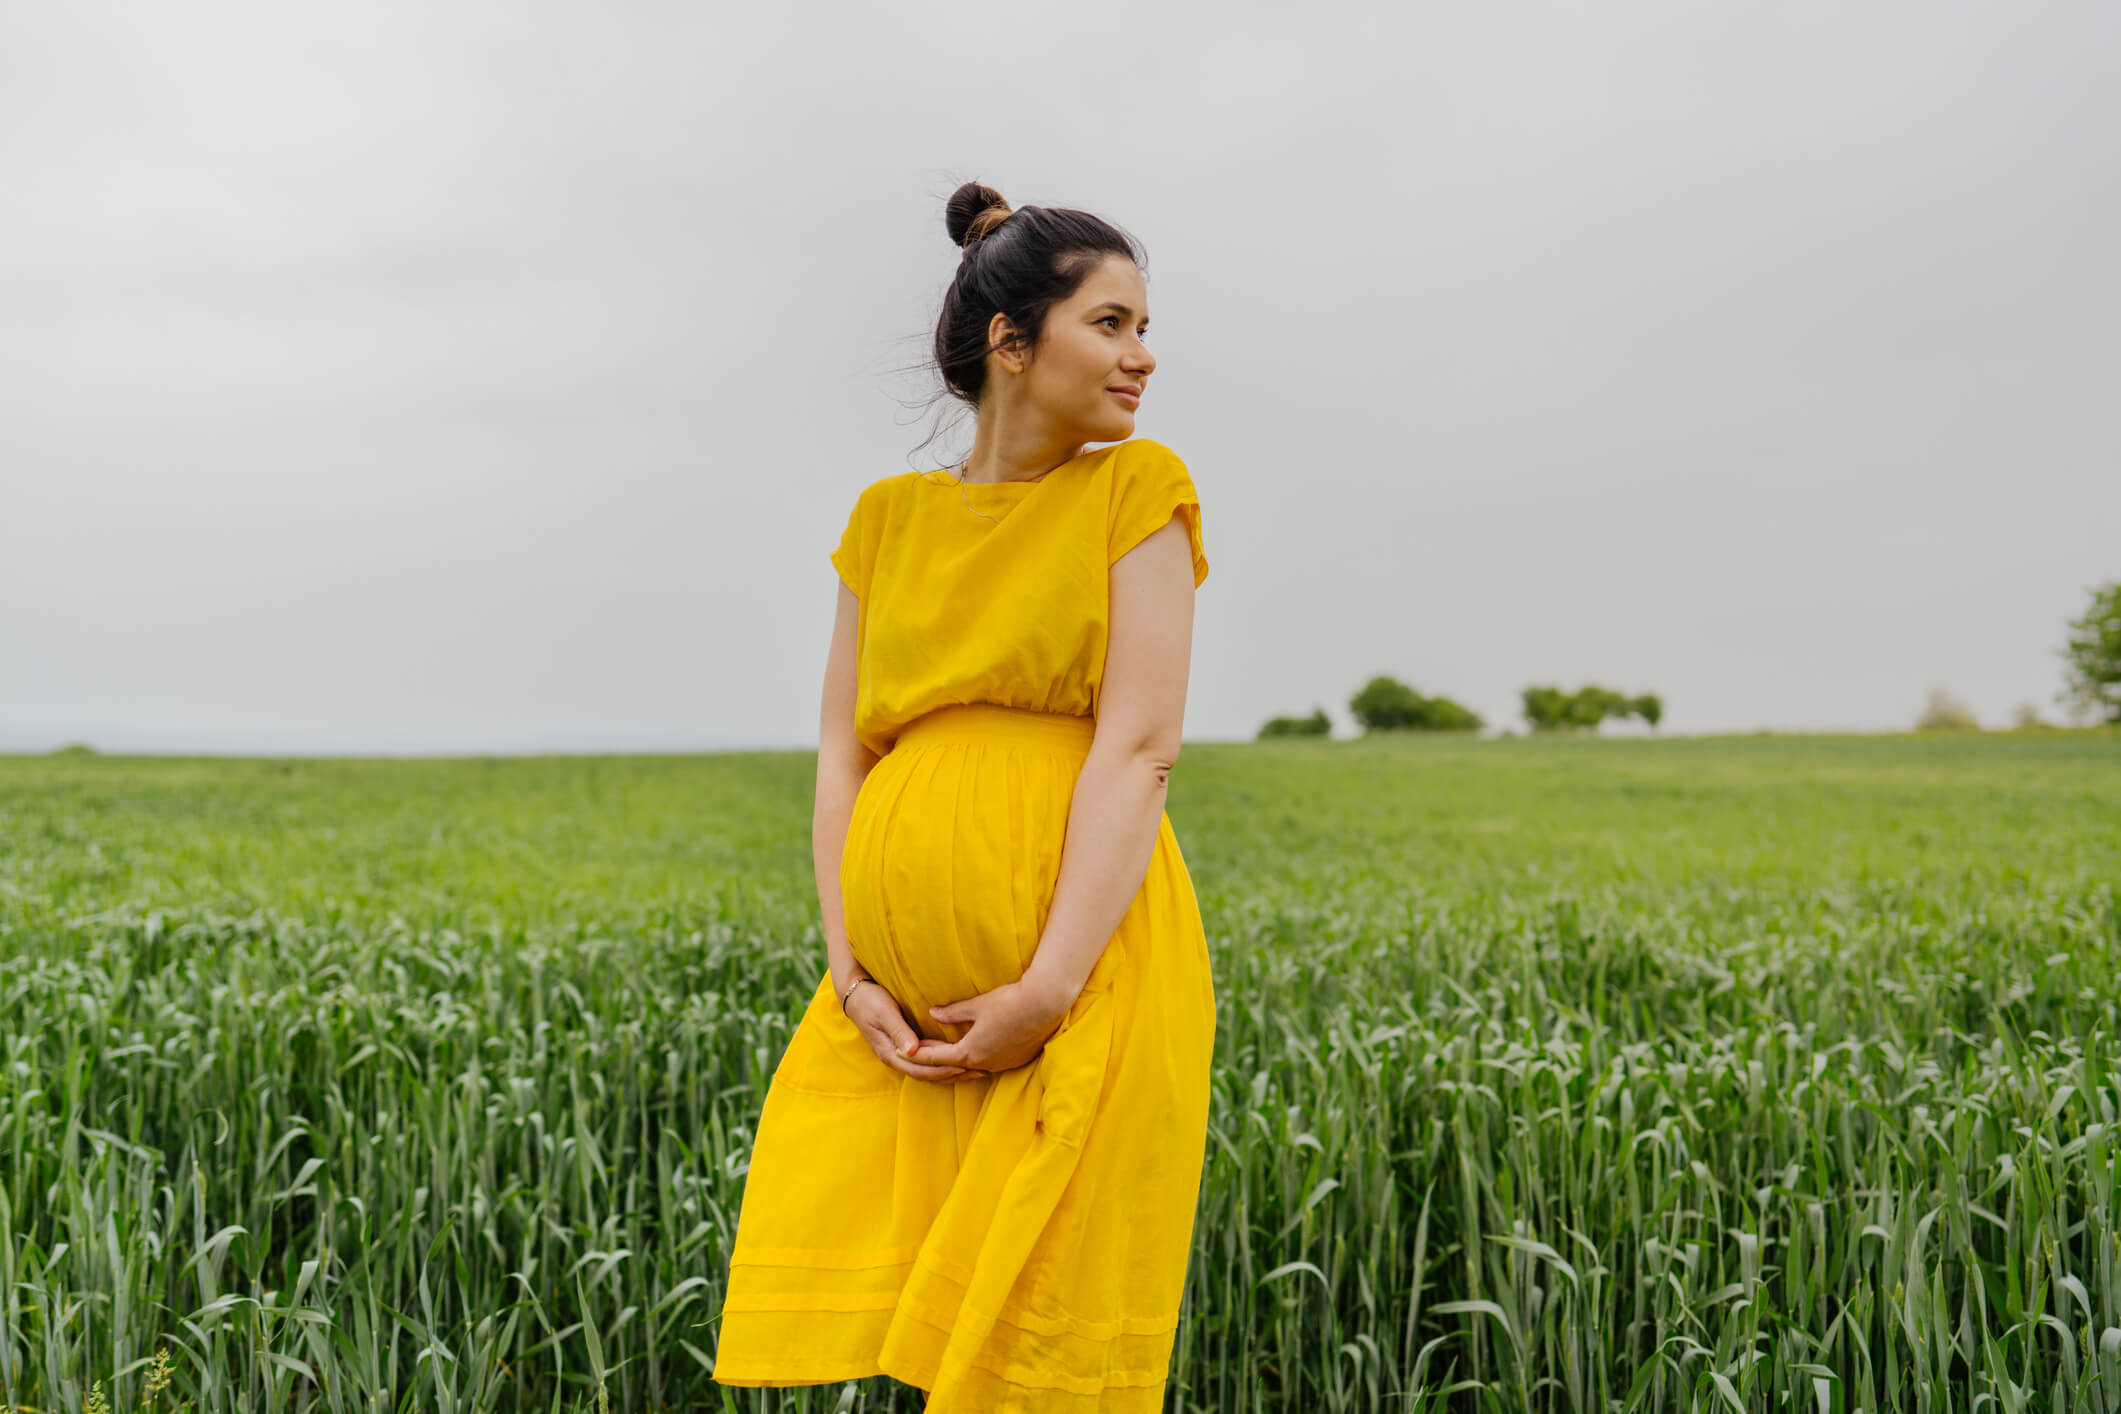 Photo of a pregnant woman standing alone on a grass field, stroking her baby bump and enjoying the calm meadow.